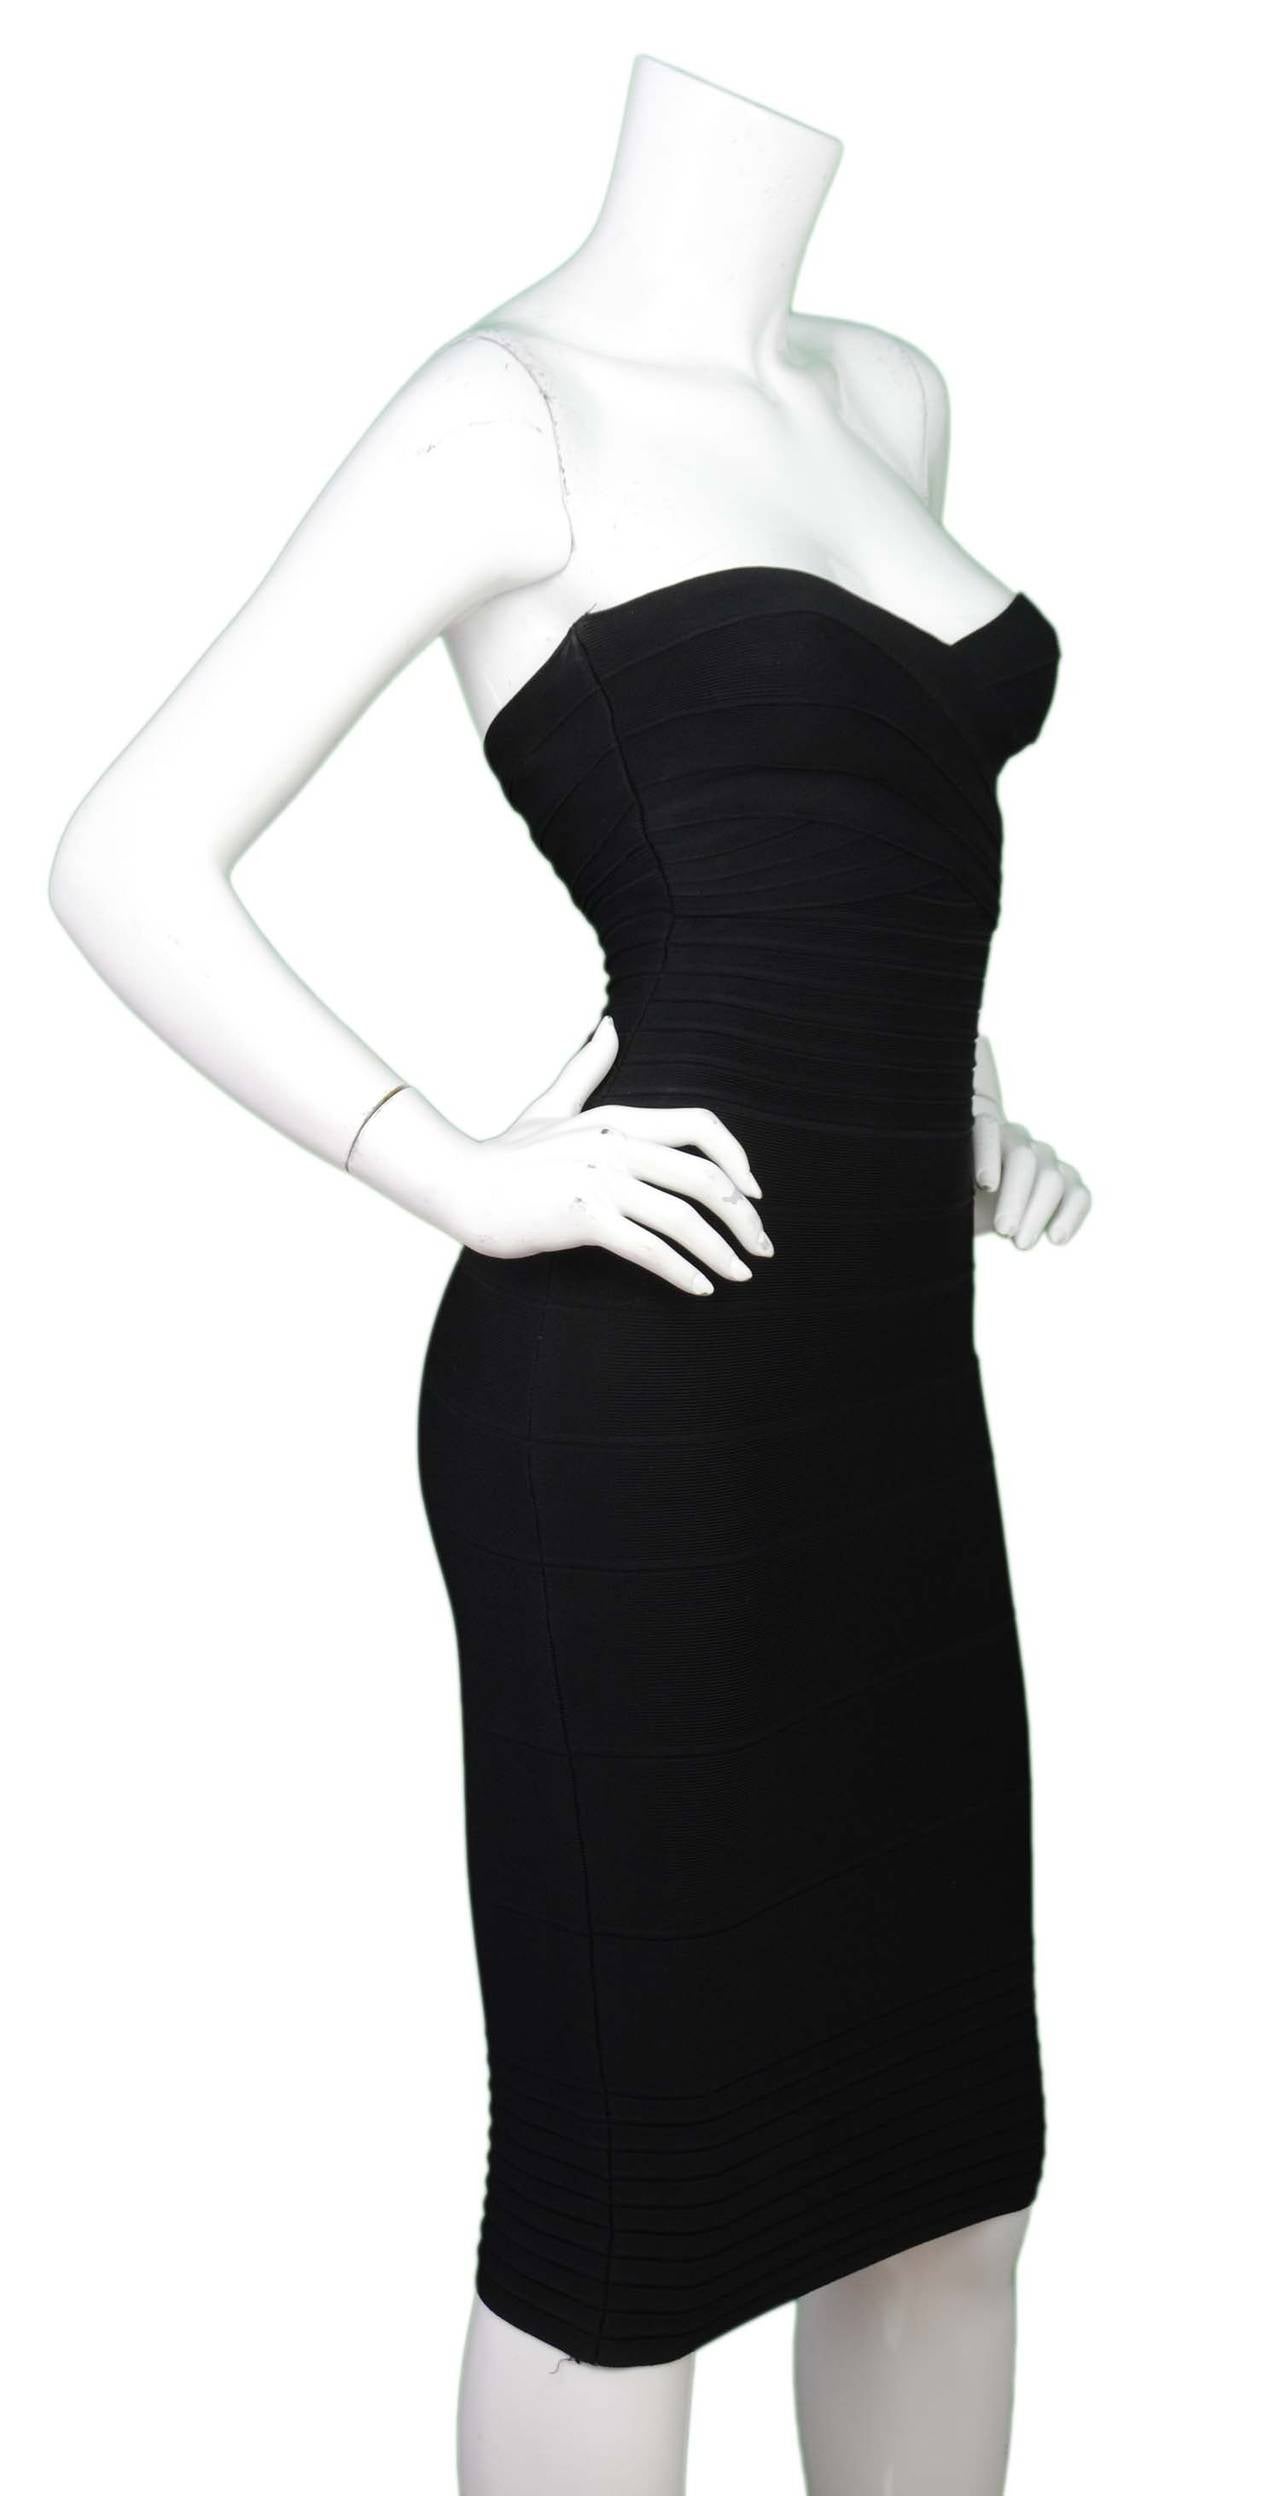 Herve Leger Black Strapless Bandage Dress
Features a sweetheart neckline

    Made in: China
    Color: Black
    Composition: 90% rayon, 9% nylon, 1% spandex
    Lining: None
    Closure/opening: Back center zipper
    Exterior Pockets: